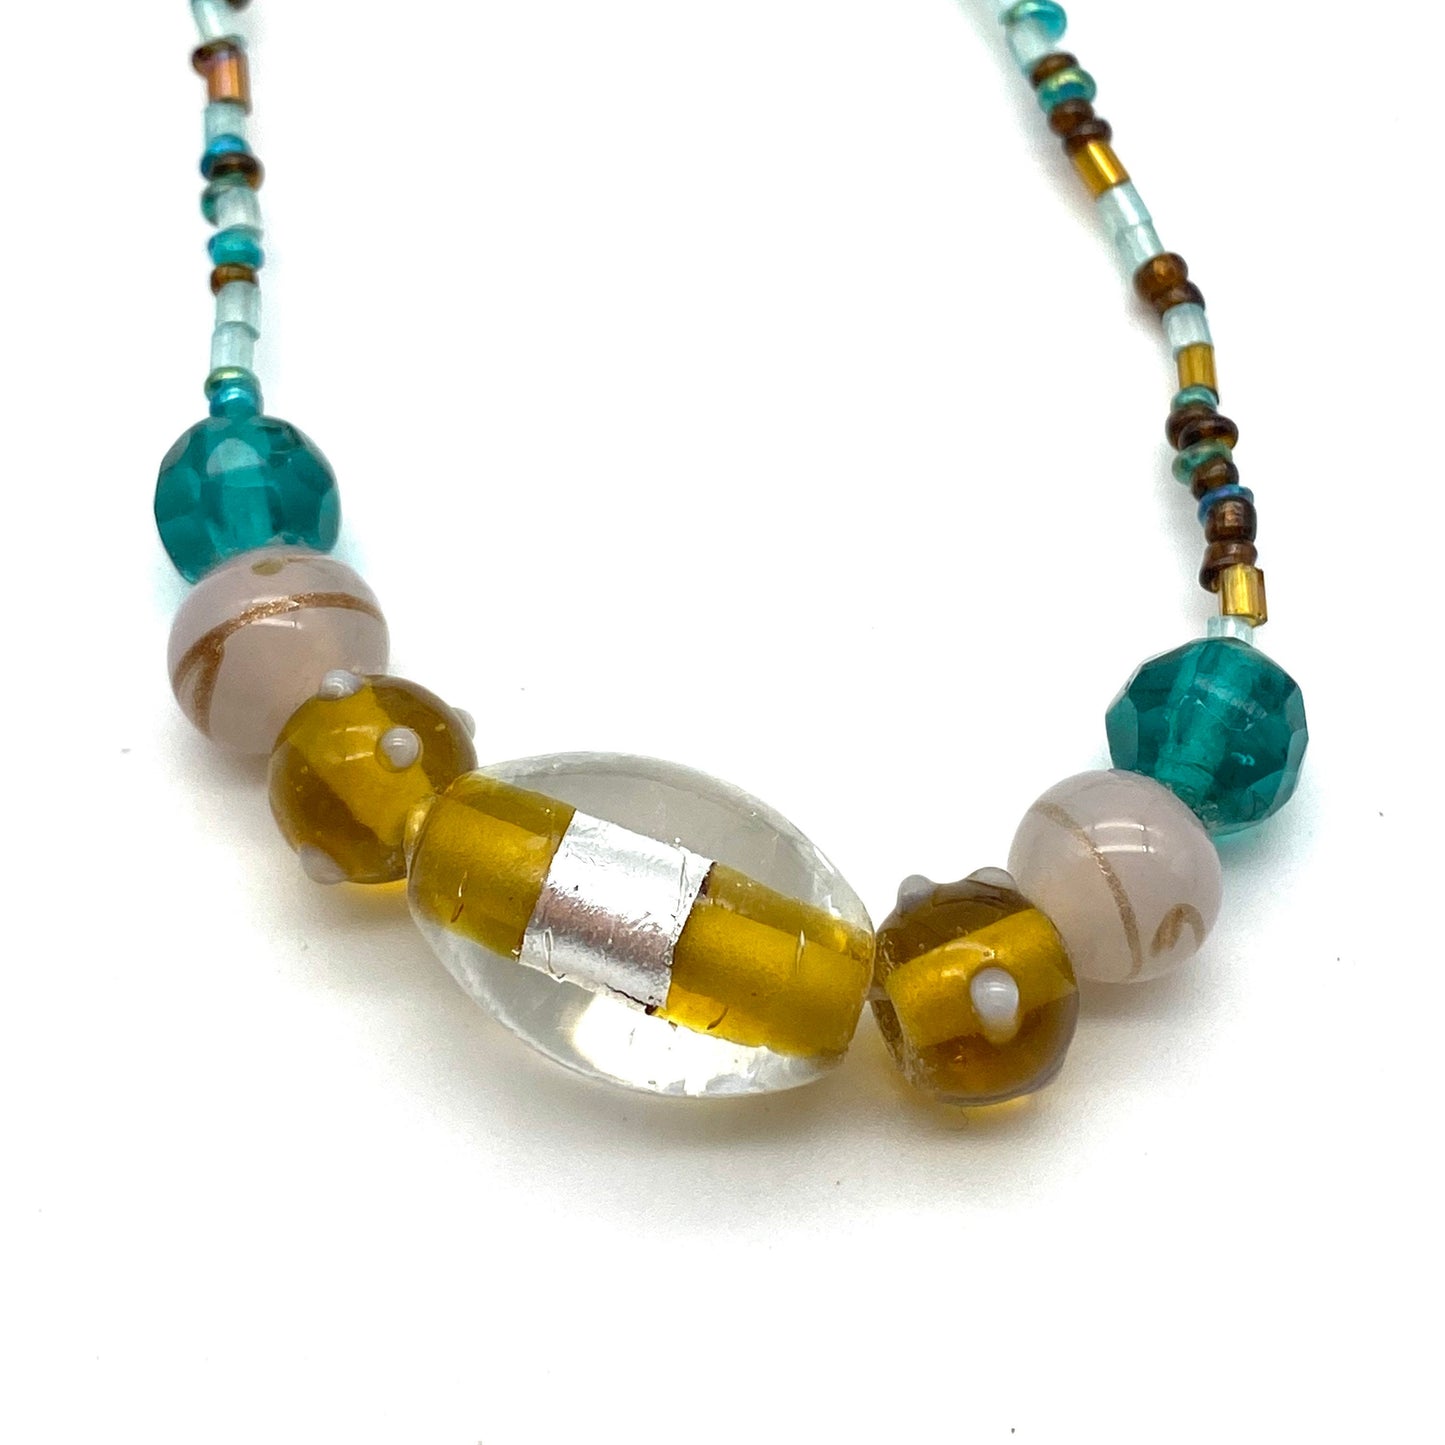 Glass Bead Necklace with Lampwork and Foil Glass